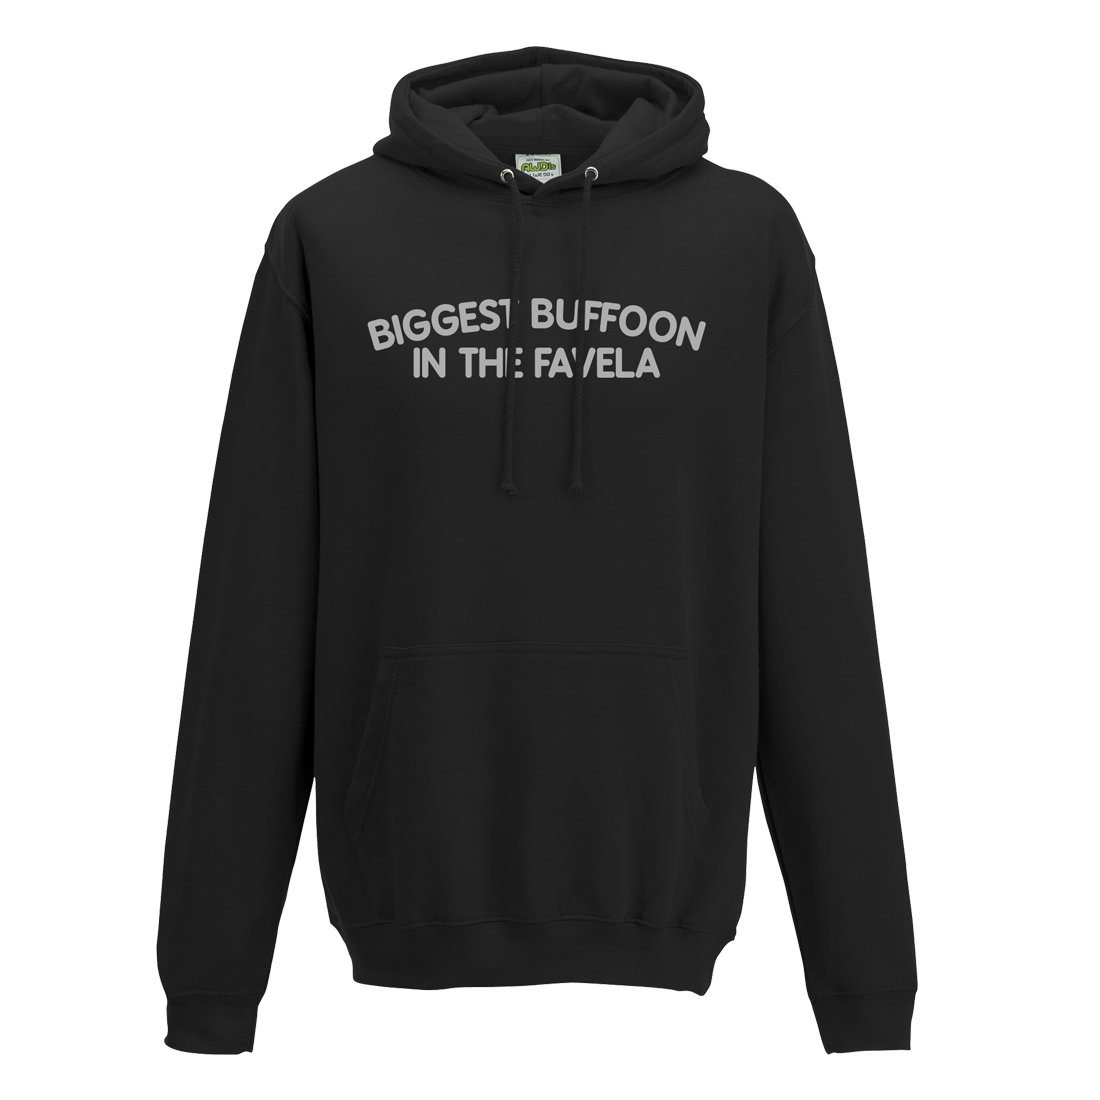 'Biggest Buffoon in the Favela' Hooded Top